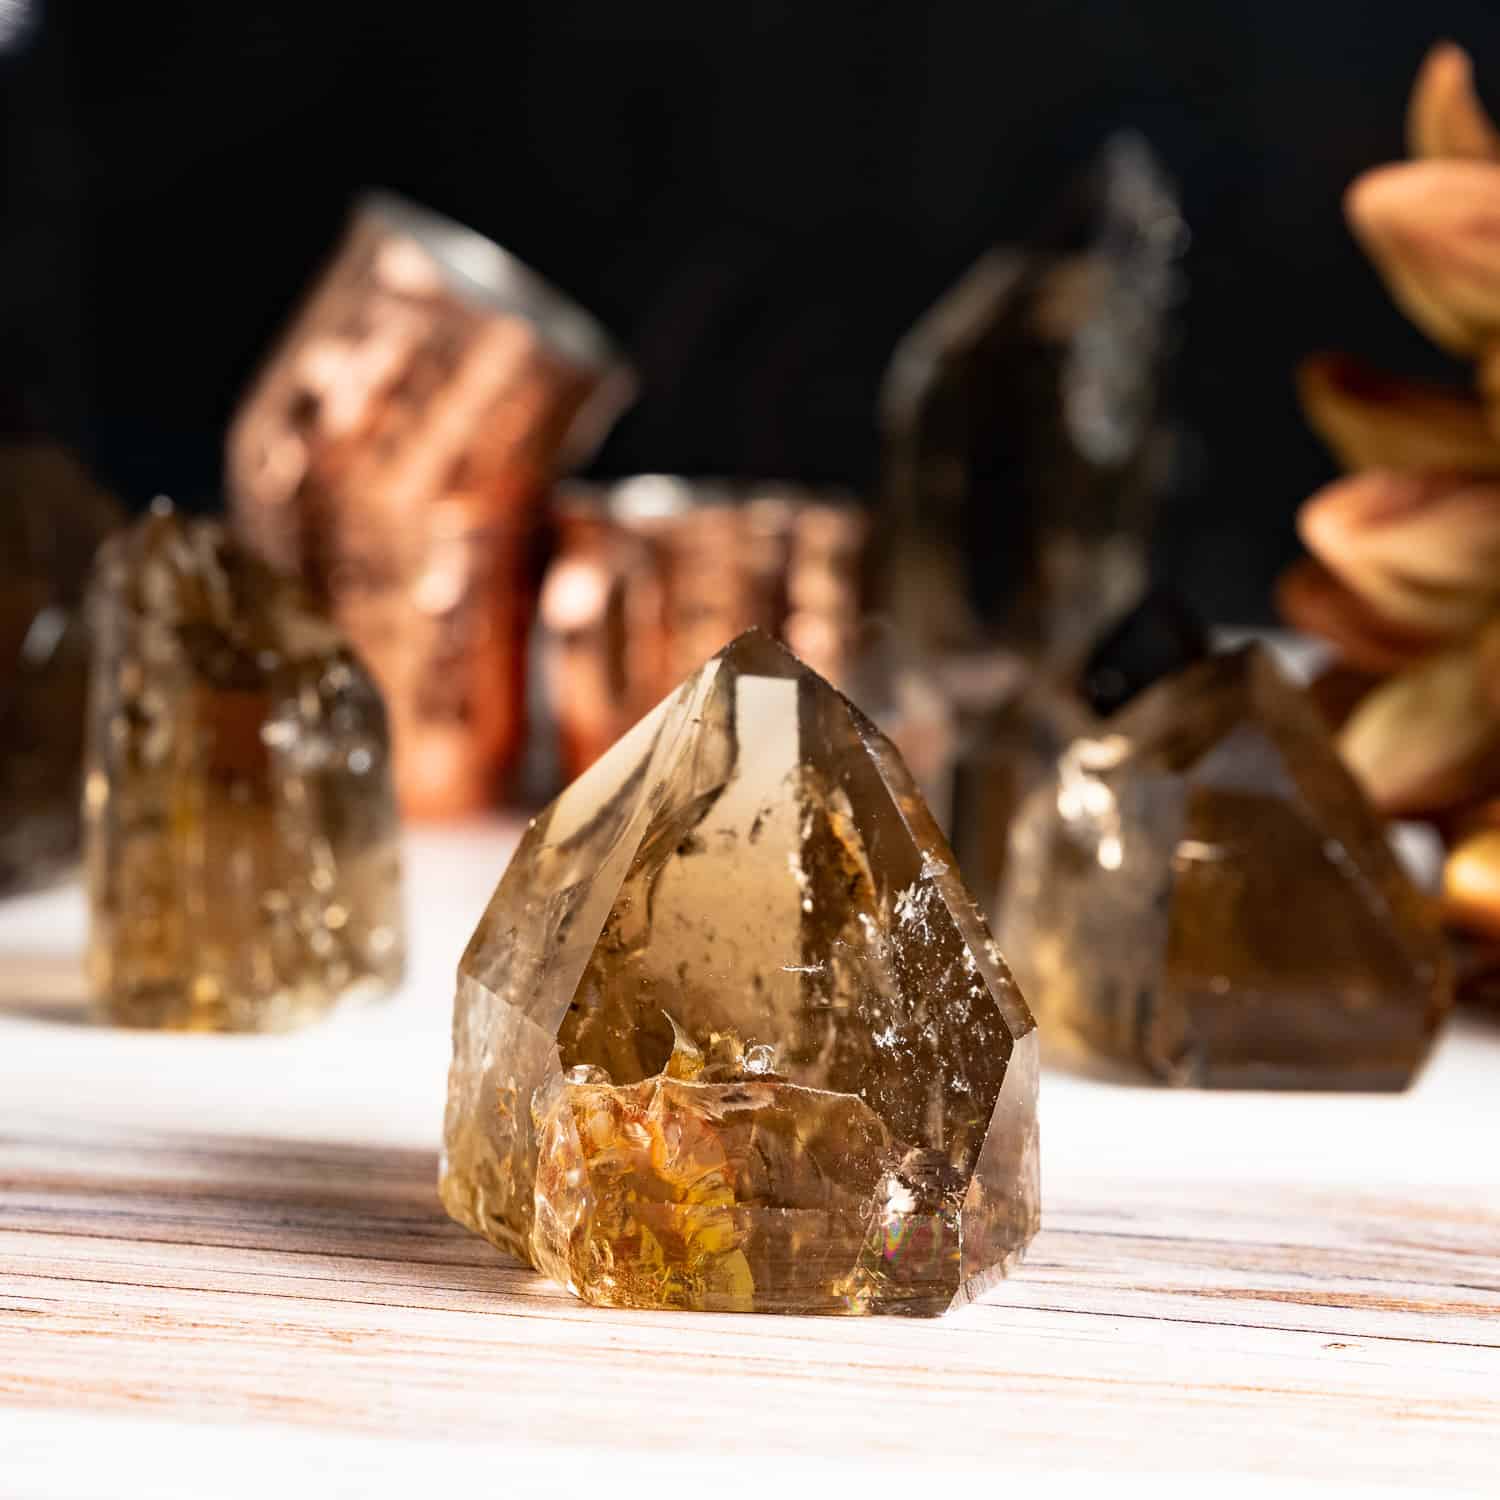 SMOKEY QUARTZ WIDE TOWERS - The Crystal Apothecary Co